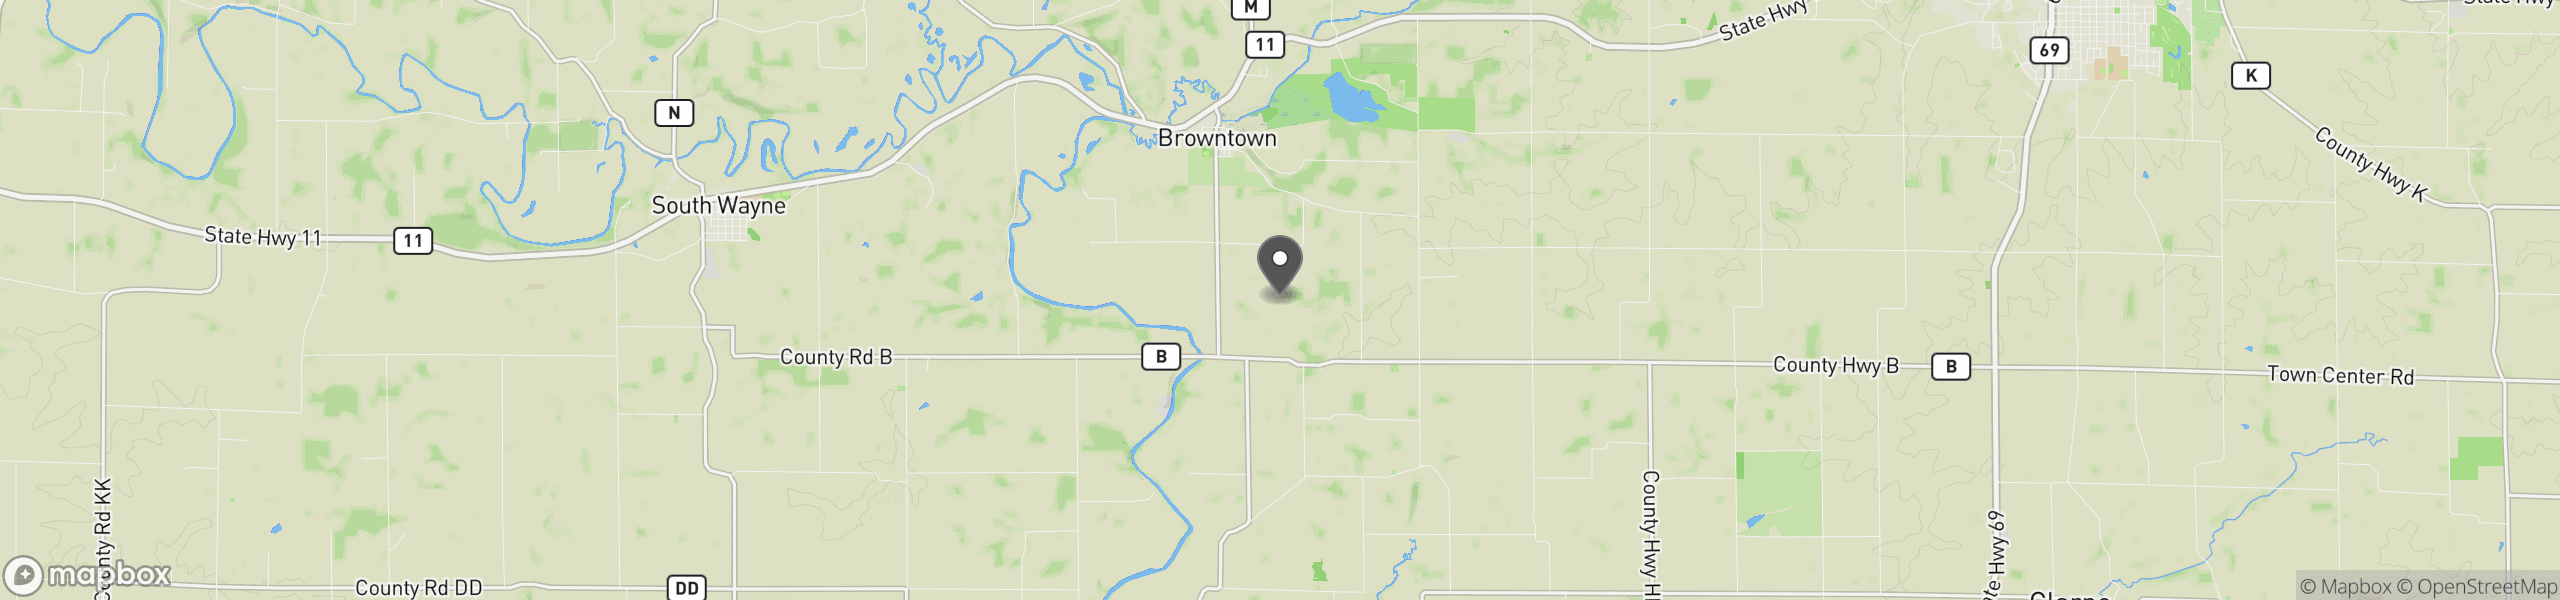 Browntown, WI 53522